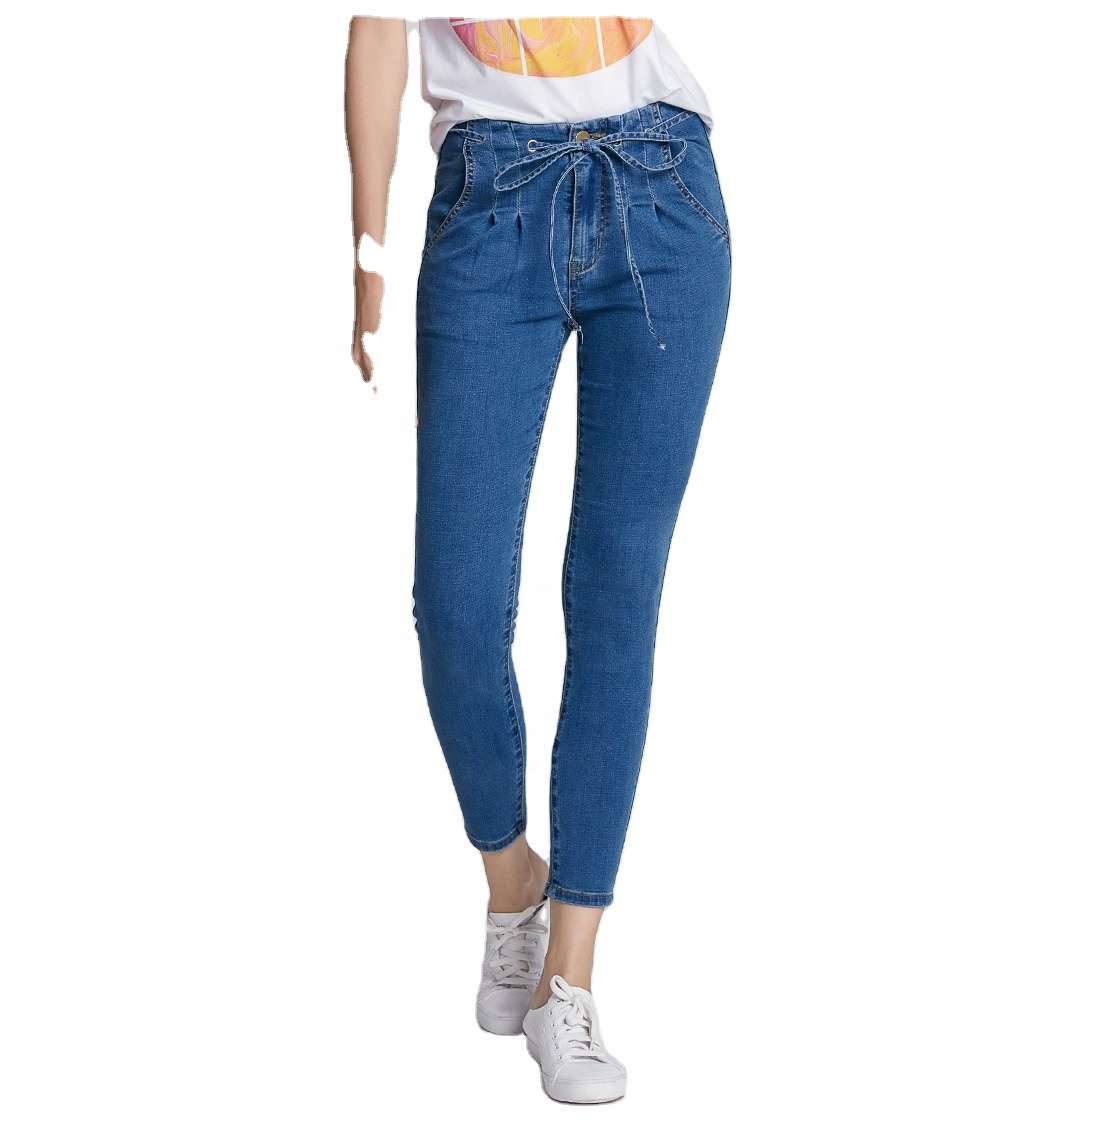 2020 New Arrival Slim Skinny Sashes Edgy Comfortable Denimpencil pant Blue Women Jeans